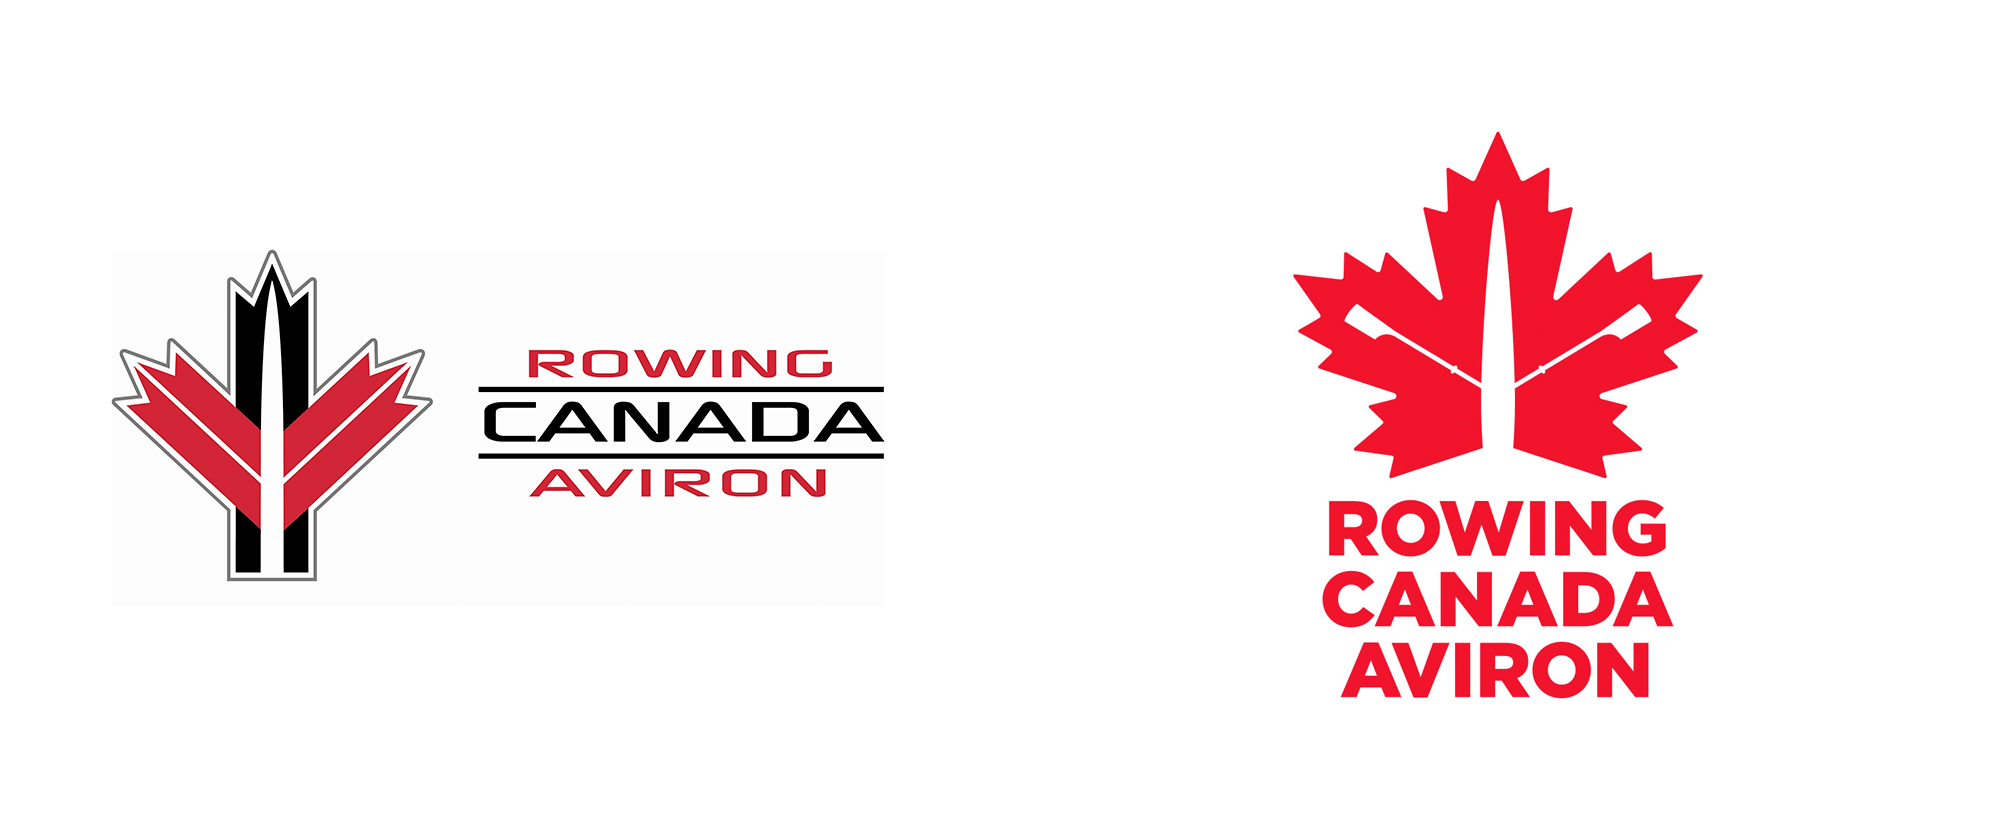 Rowing Logo - Brand New: New Logo for Rowing Canada Aviron by They